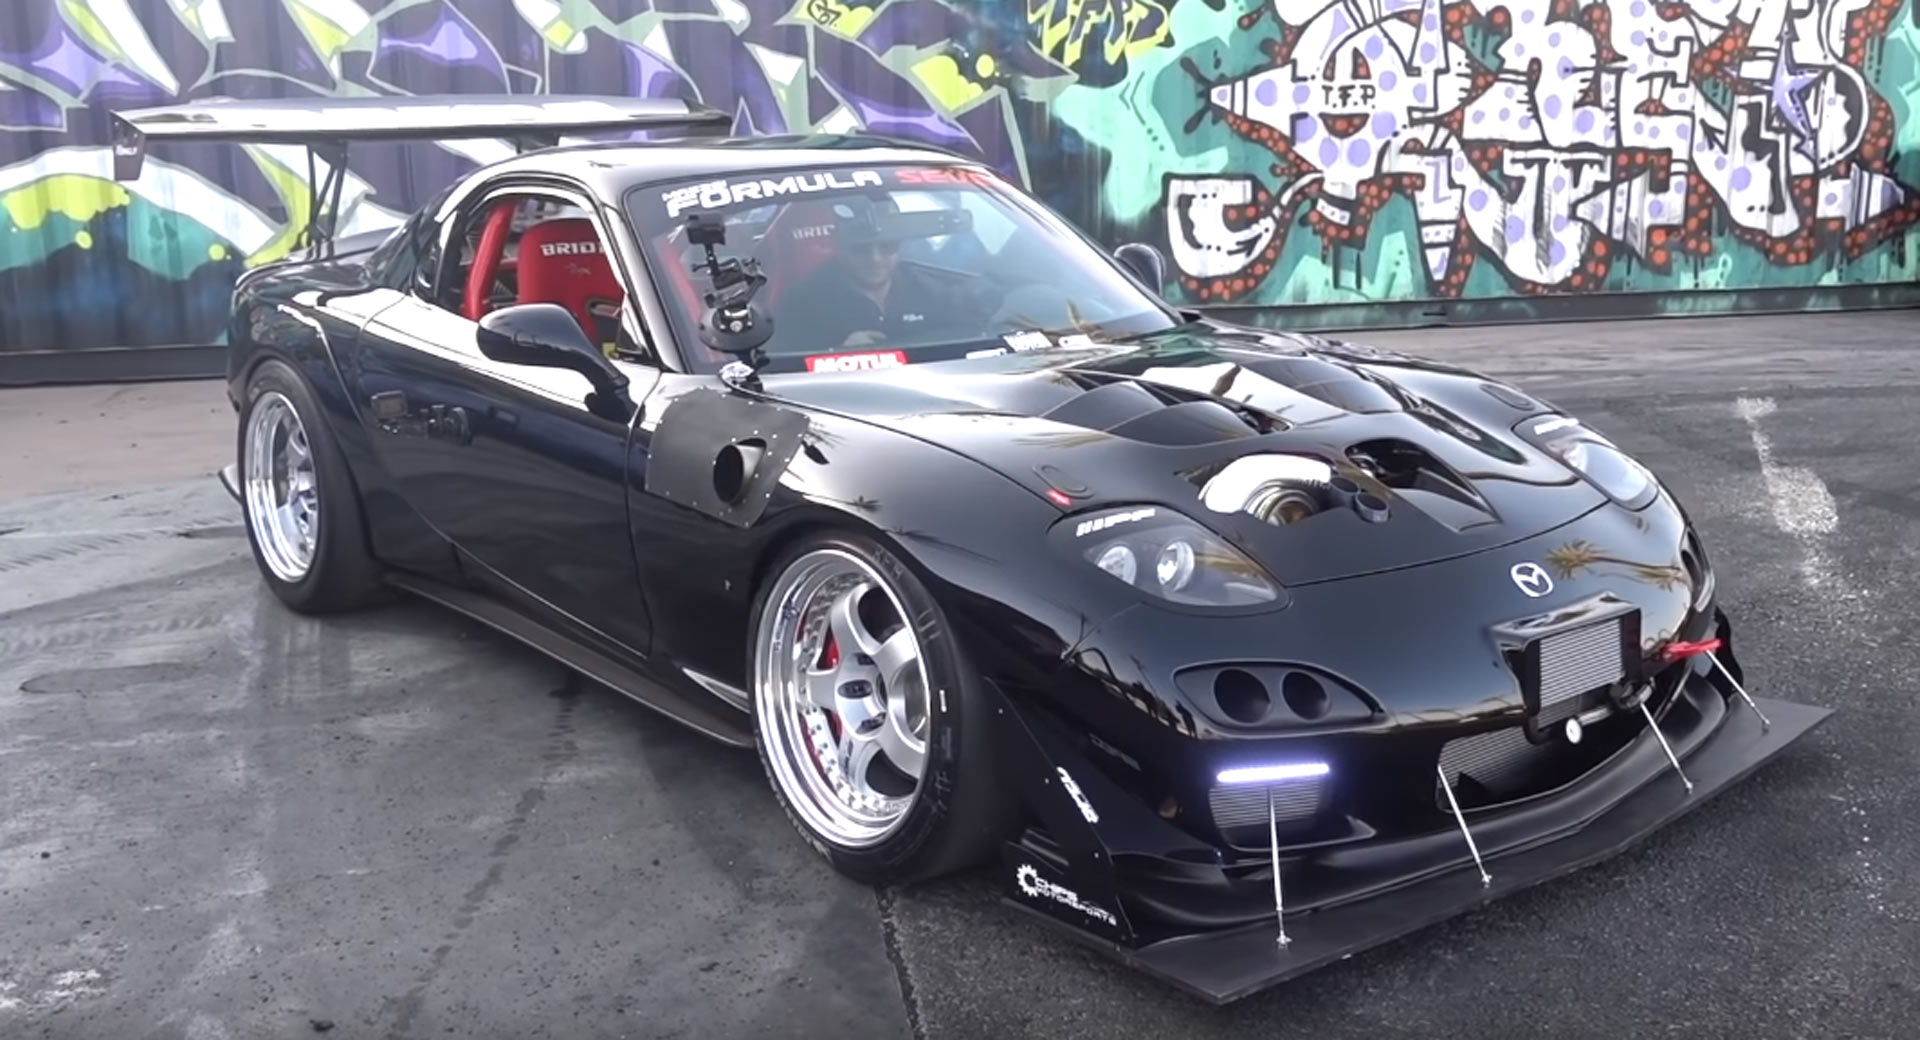 Turbo Four Rotor Mazda Rx 7 Has 1 000 Hp Sounds Absolutely Insane Carscoops